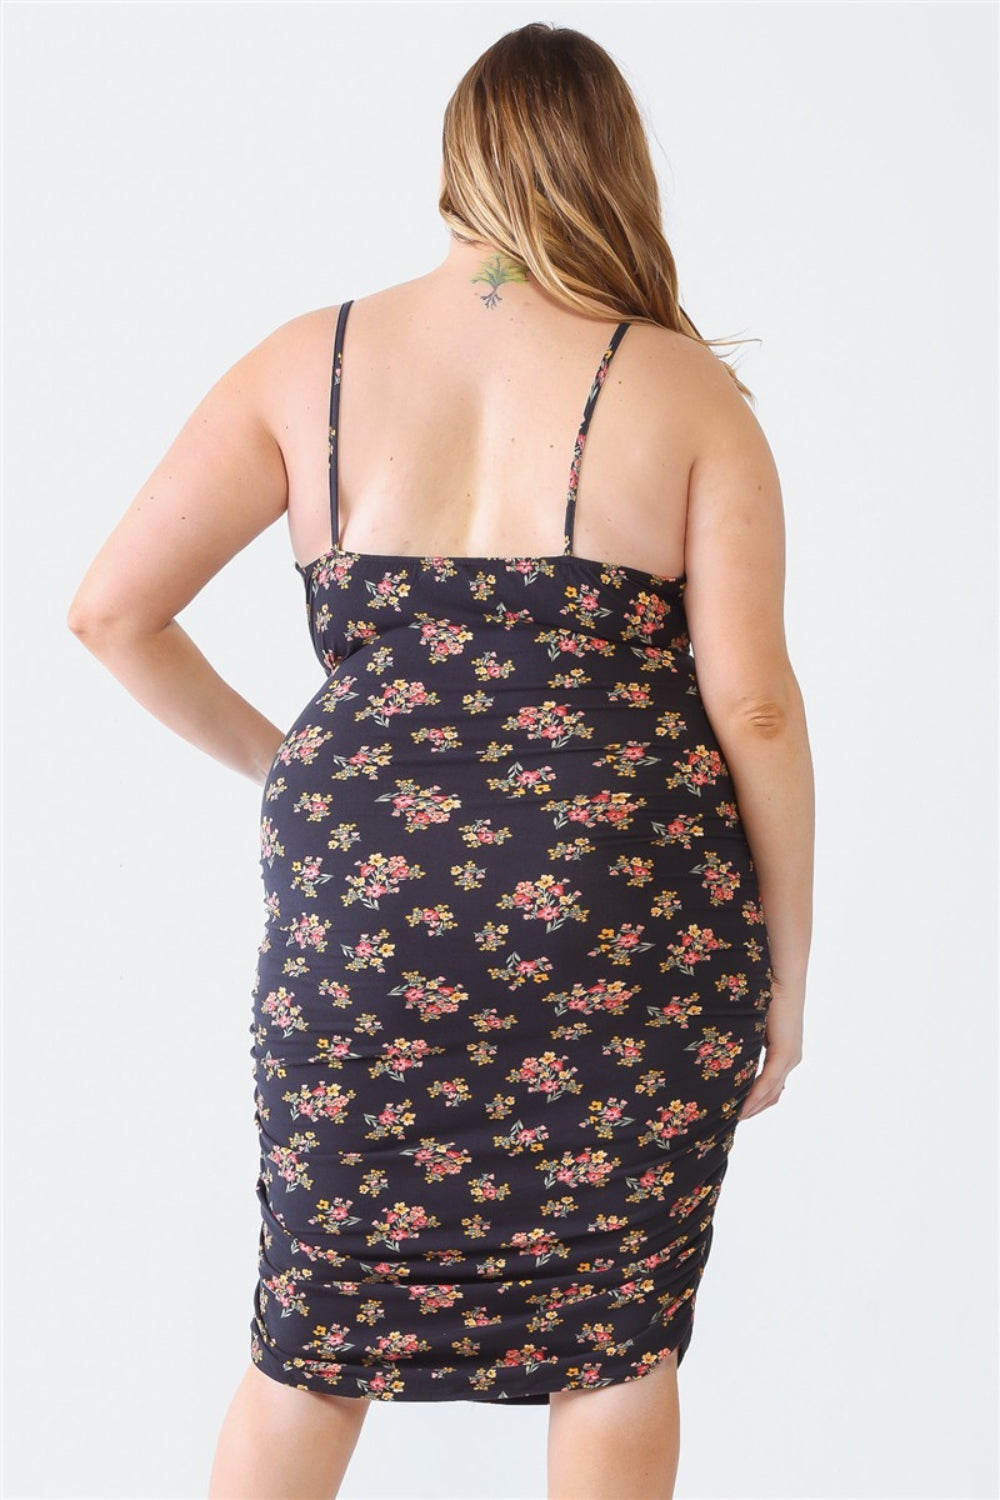 Blossom Beauty Ruched Floral Cami Dress